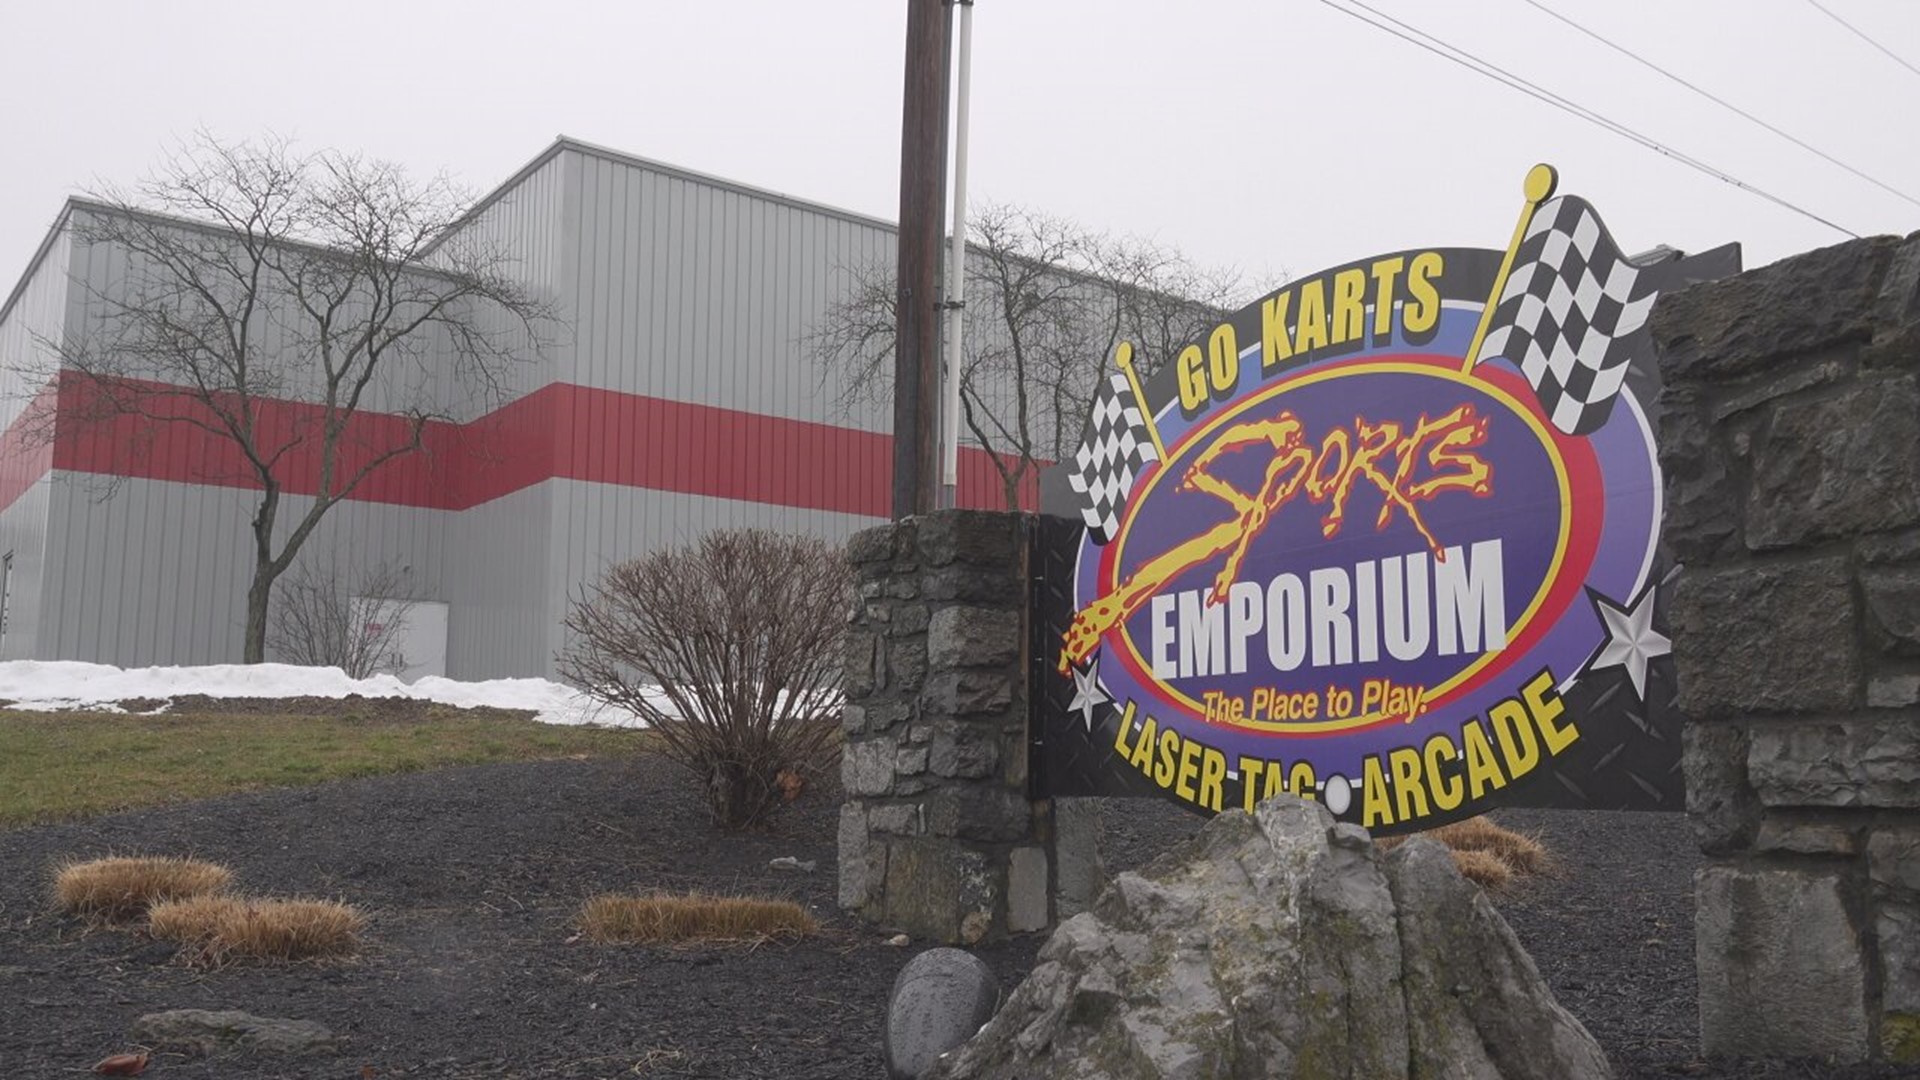 A go-to activity spot for more than 30 years, the Carlisle Sports Emporium has everything for everyone from arcade games and go-karting to laser tag and live music.